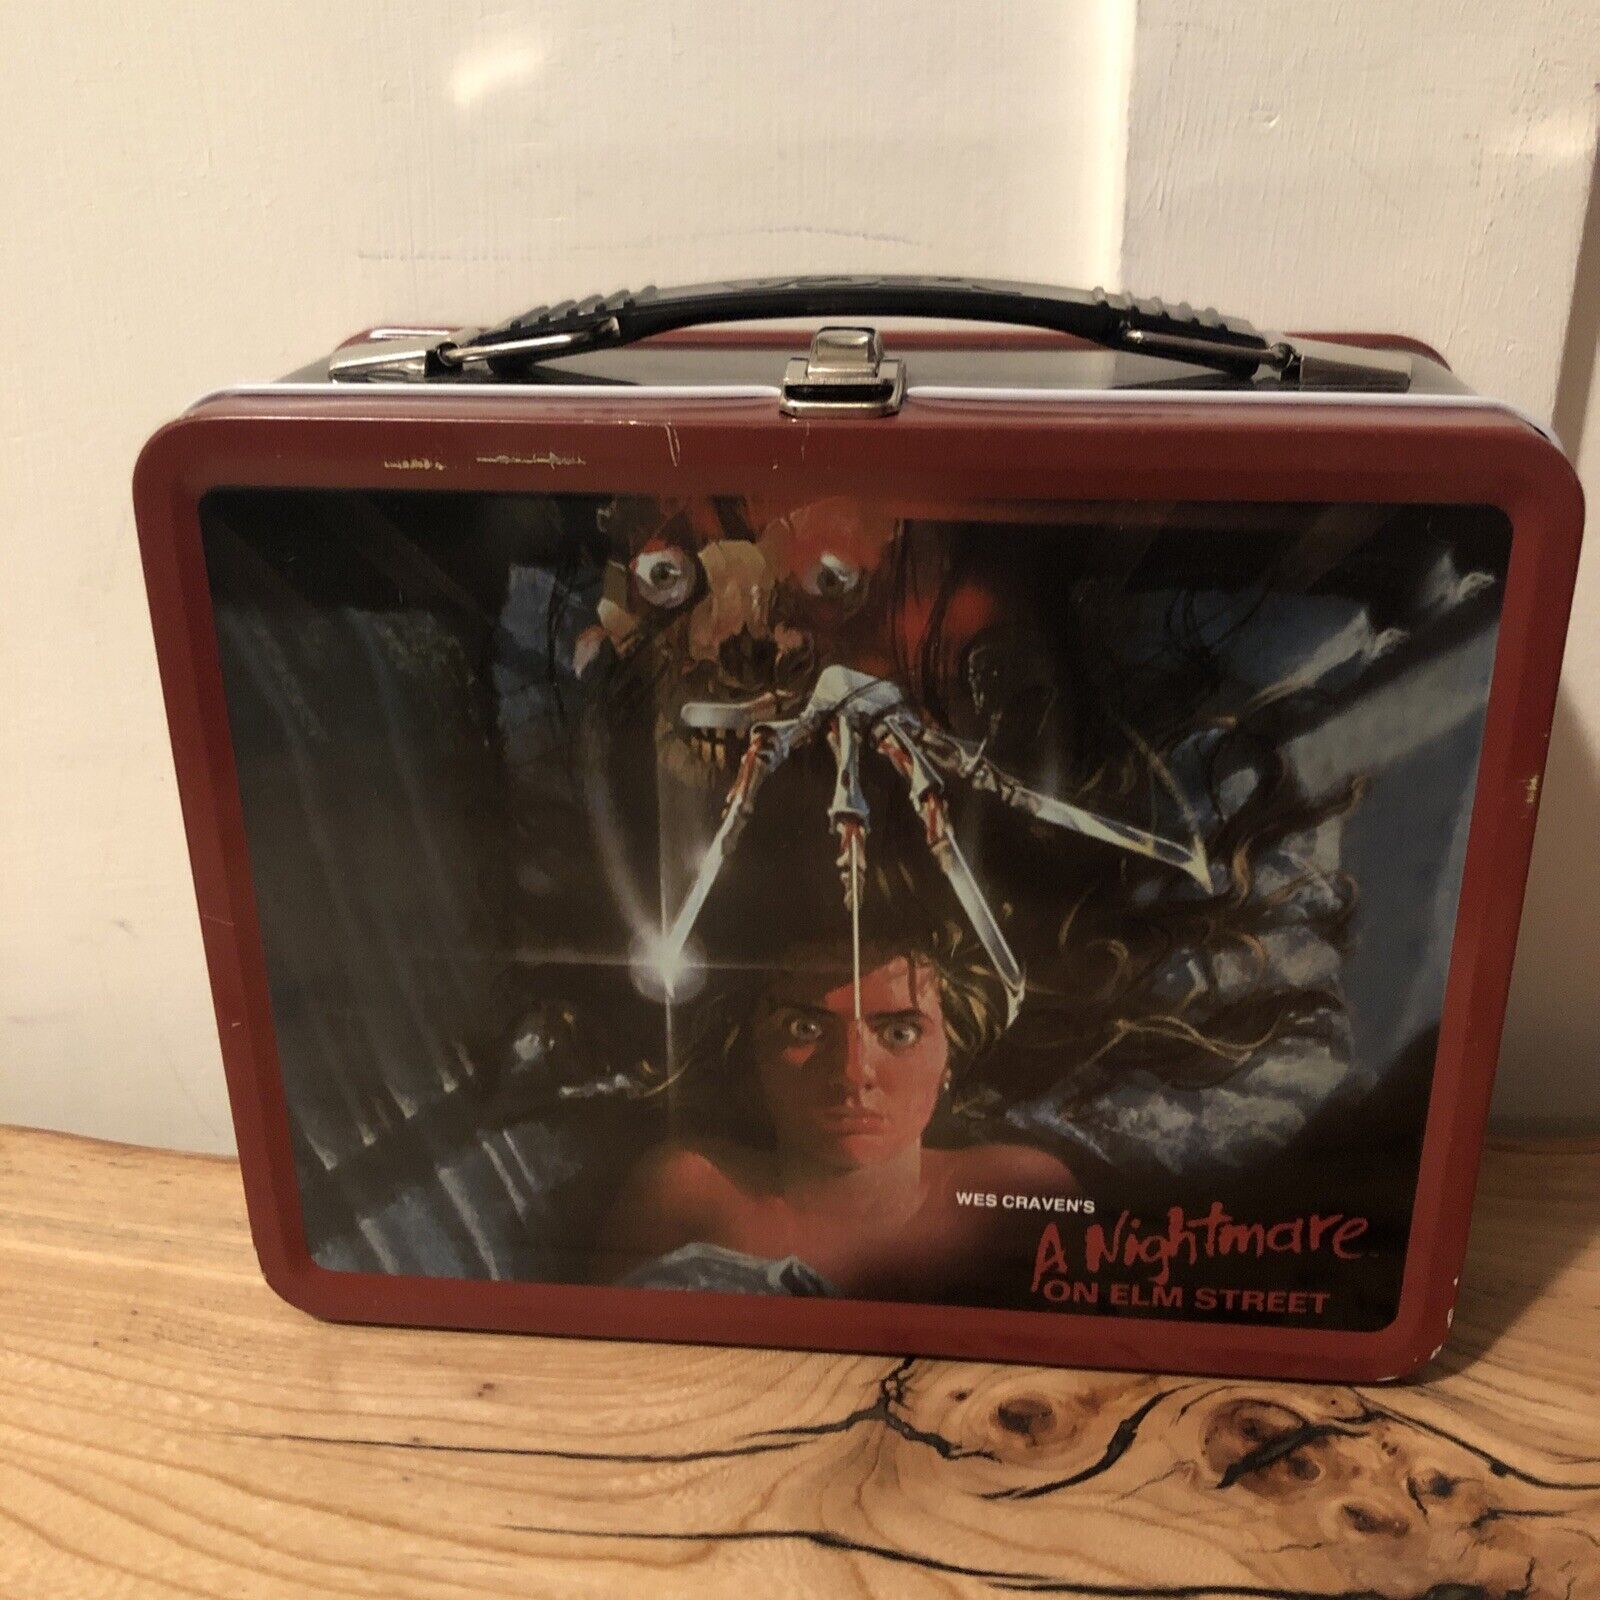 dawn corleone recommends Nightmare On Elm Street Lunch Box